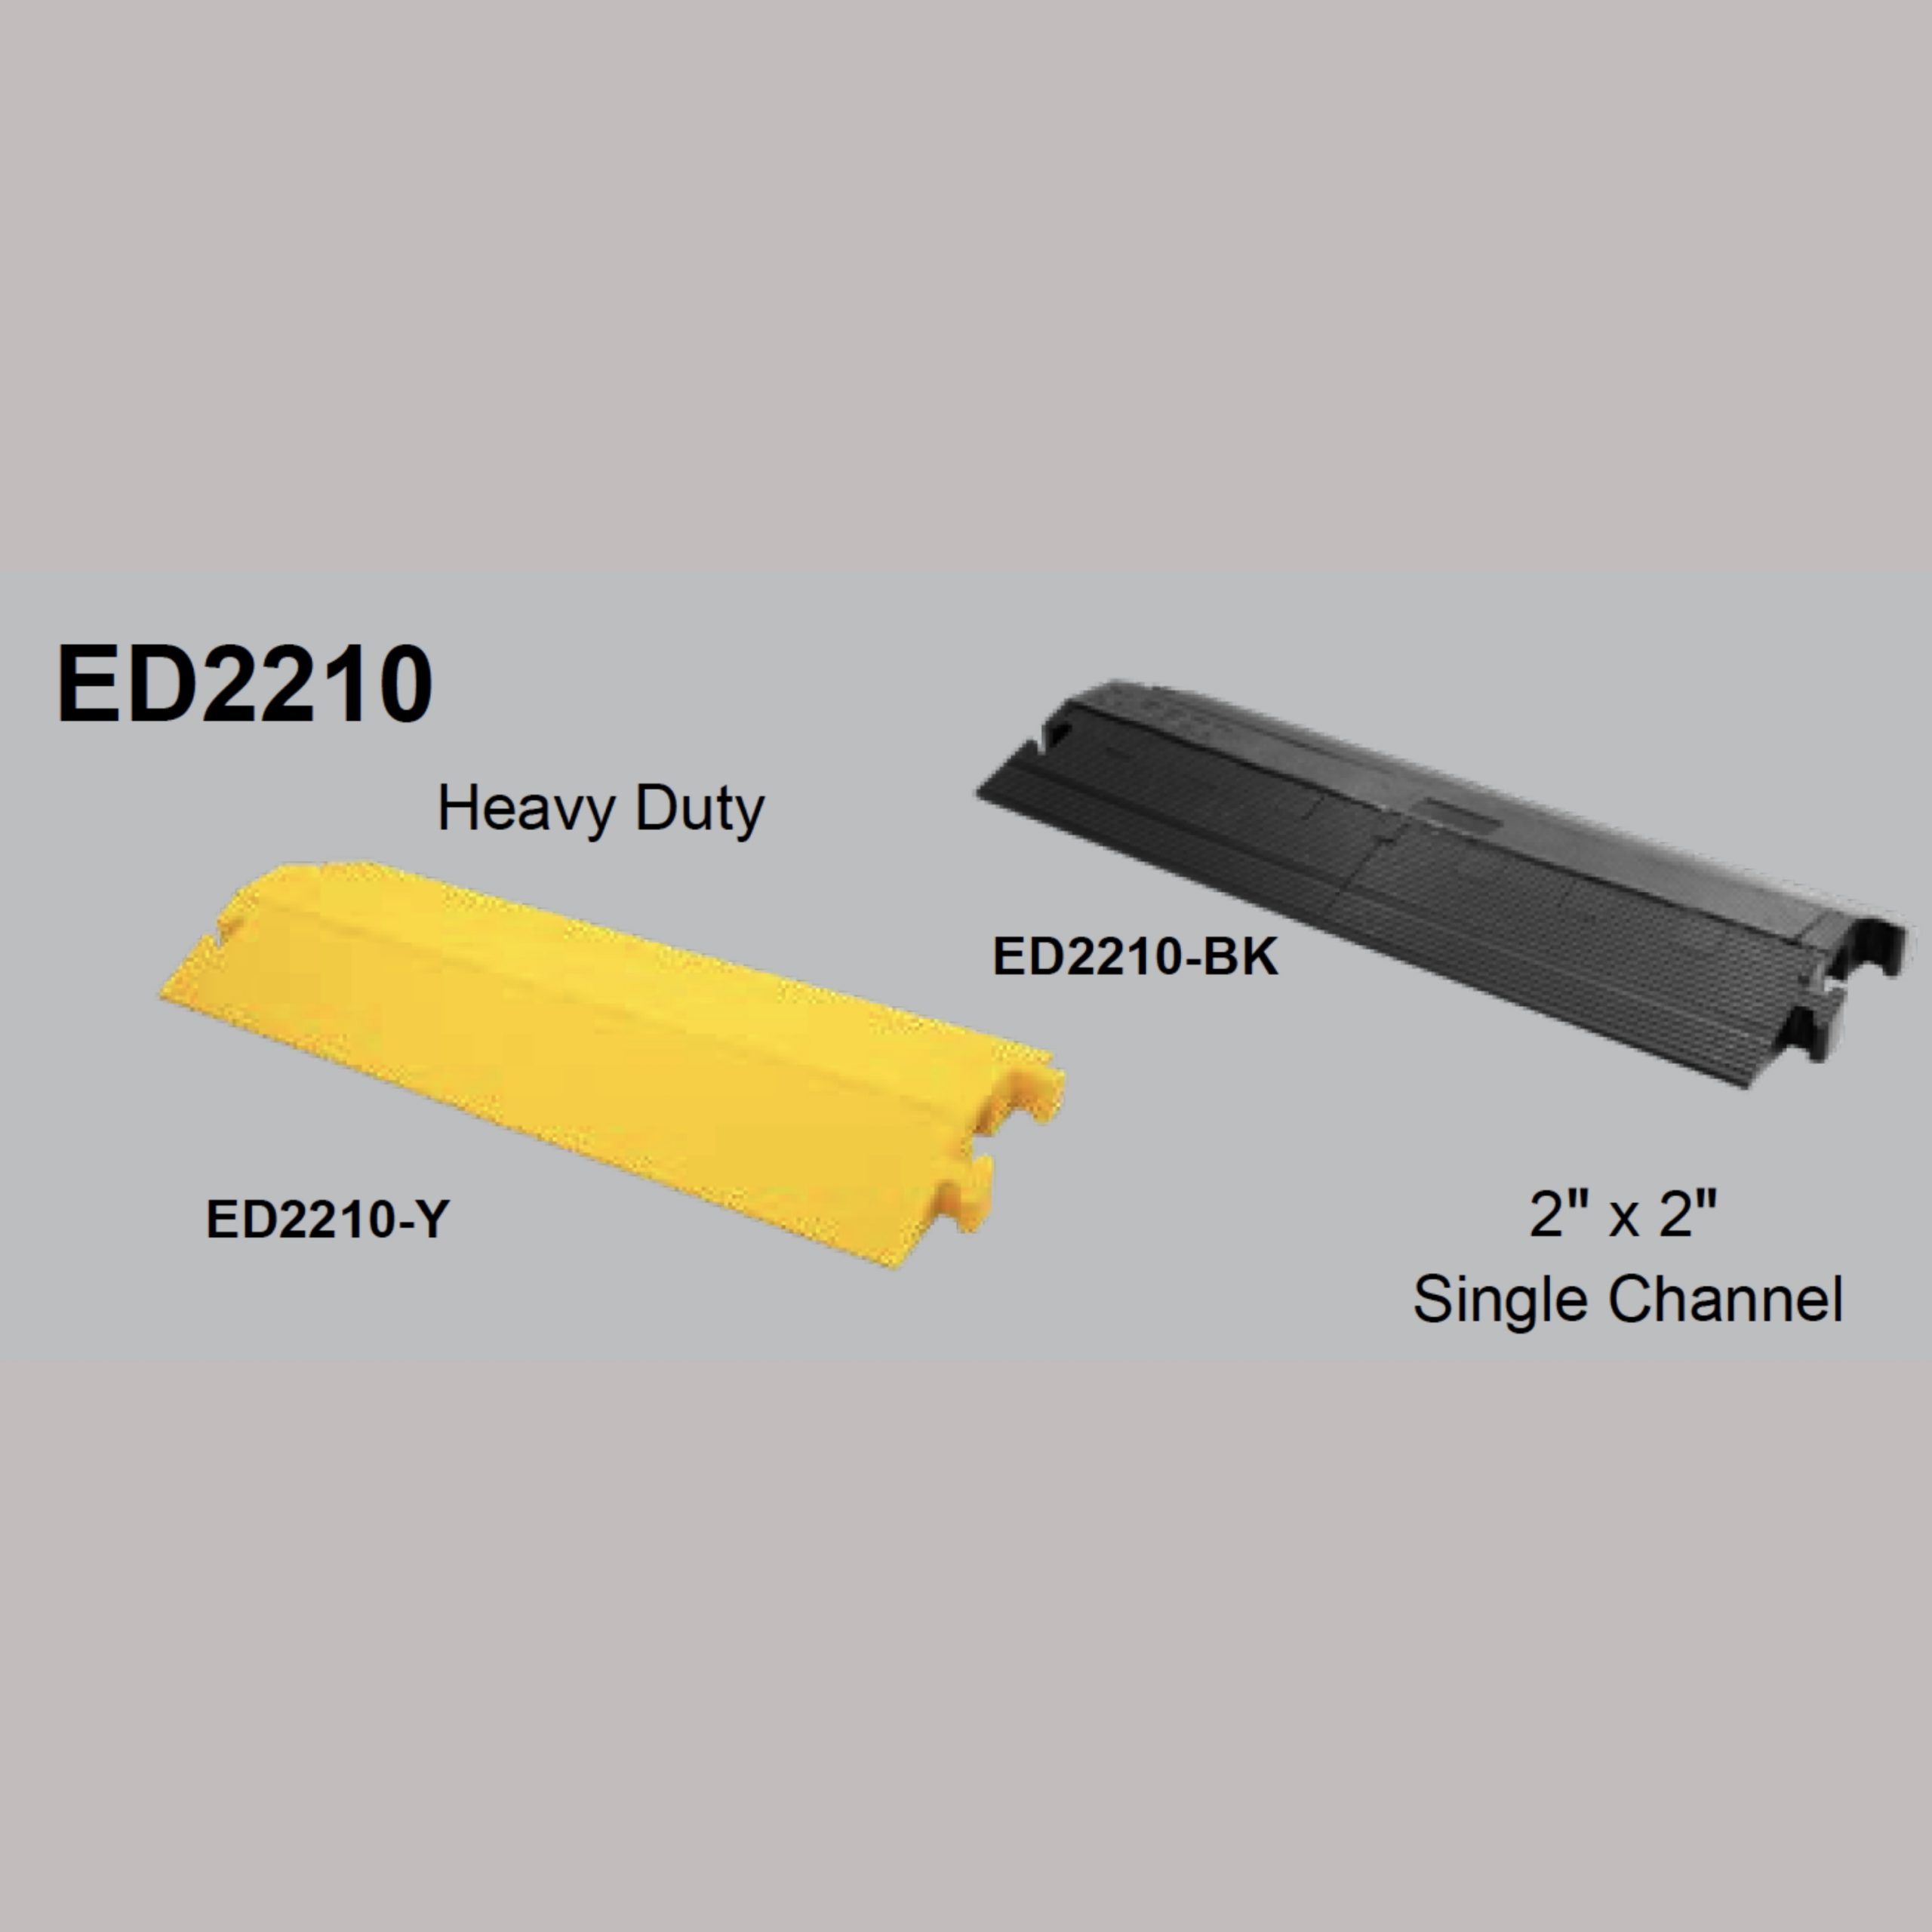 Elasco ED1050-BK Dropover, Single 1.5 inch Channel, Black, 6 pack. In  Stock. Ships Today. - Cable Protector Works - Elasco Wheel Chocks, Cable  Protectors and Cable Ramps %